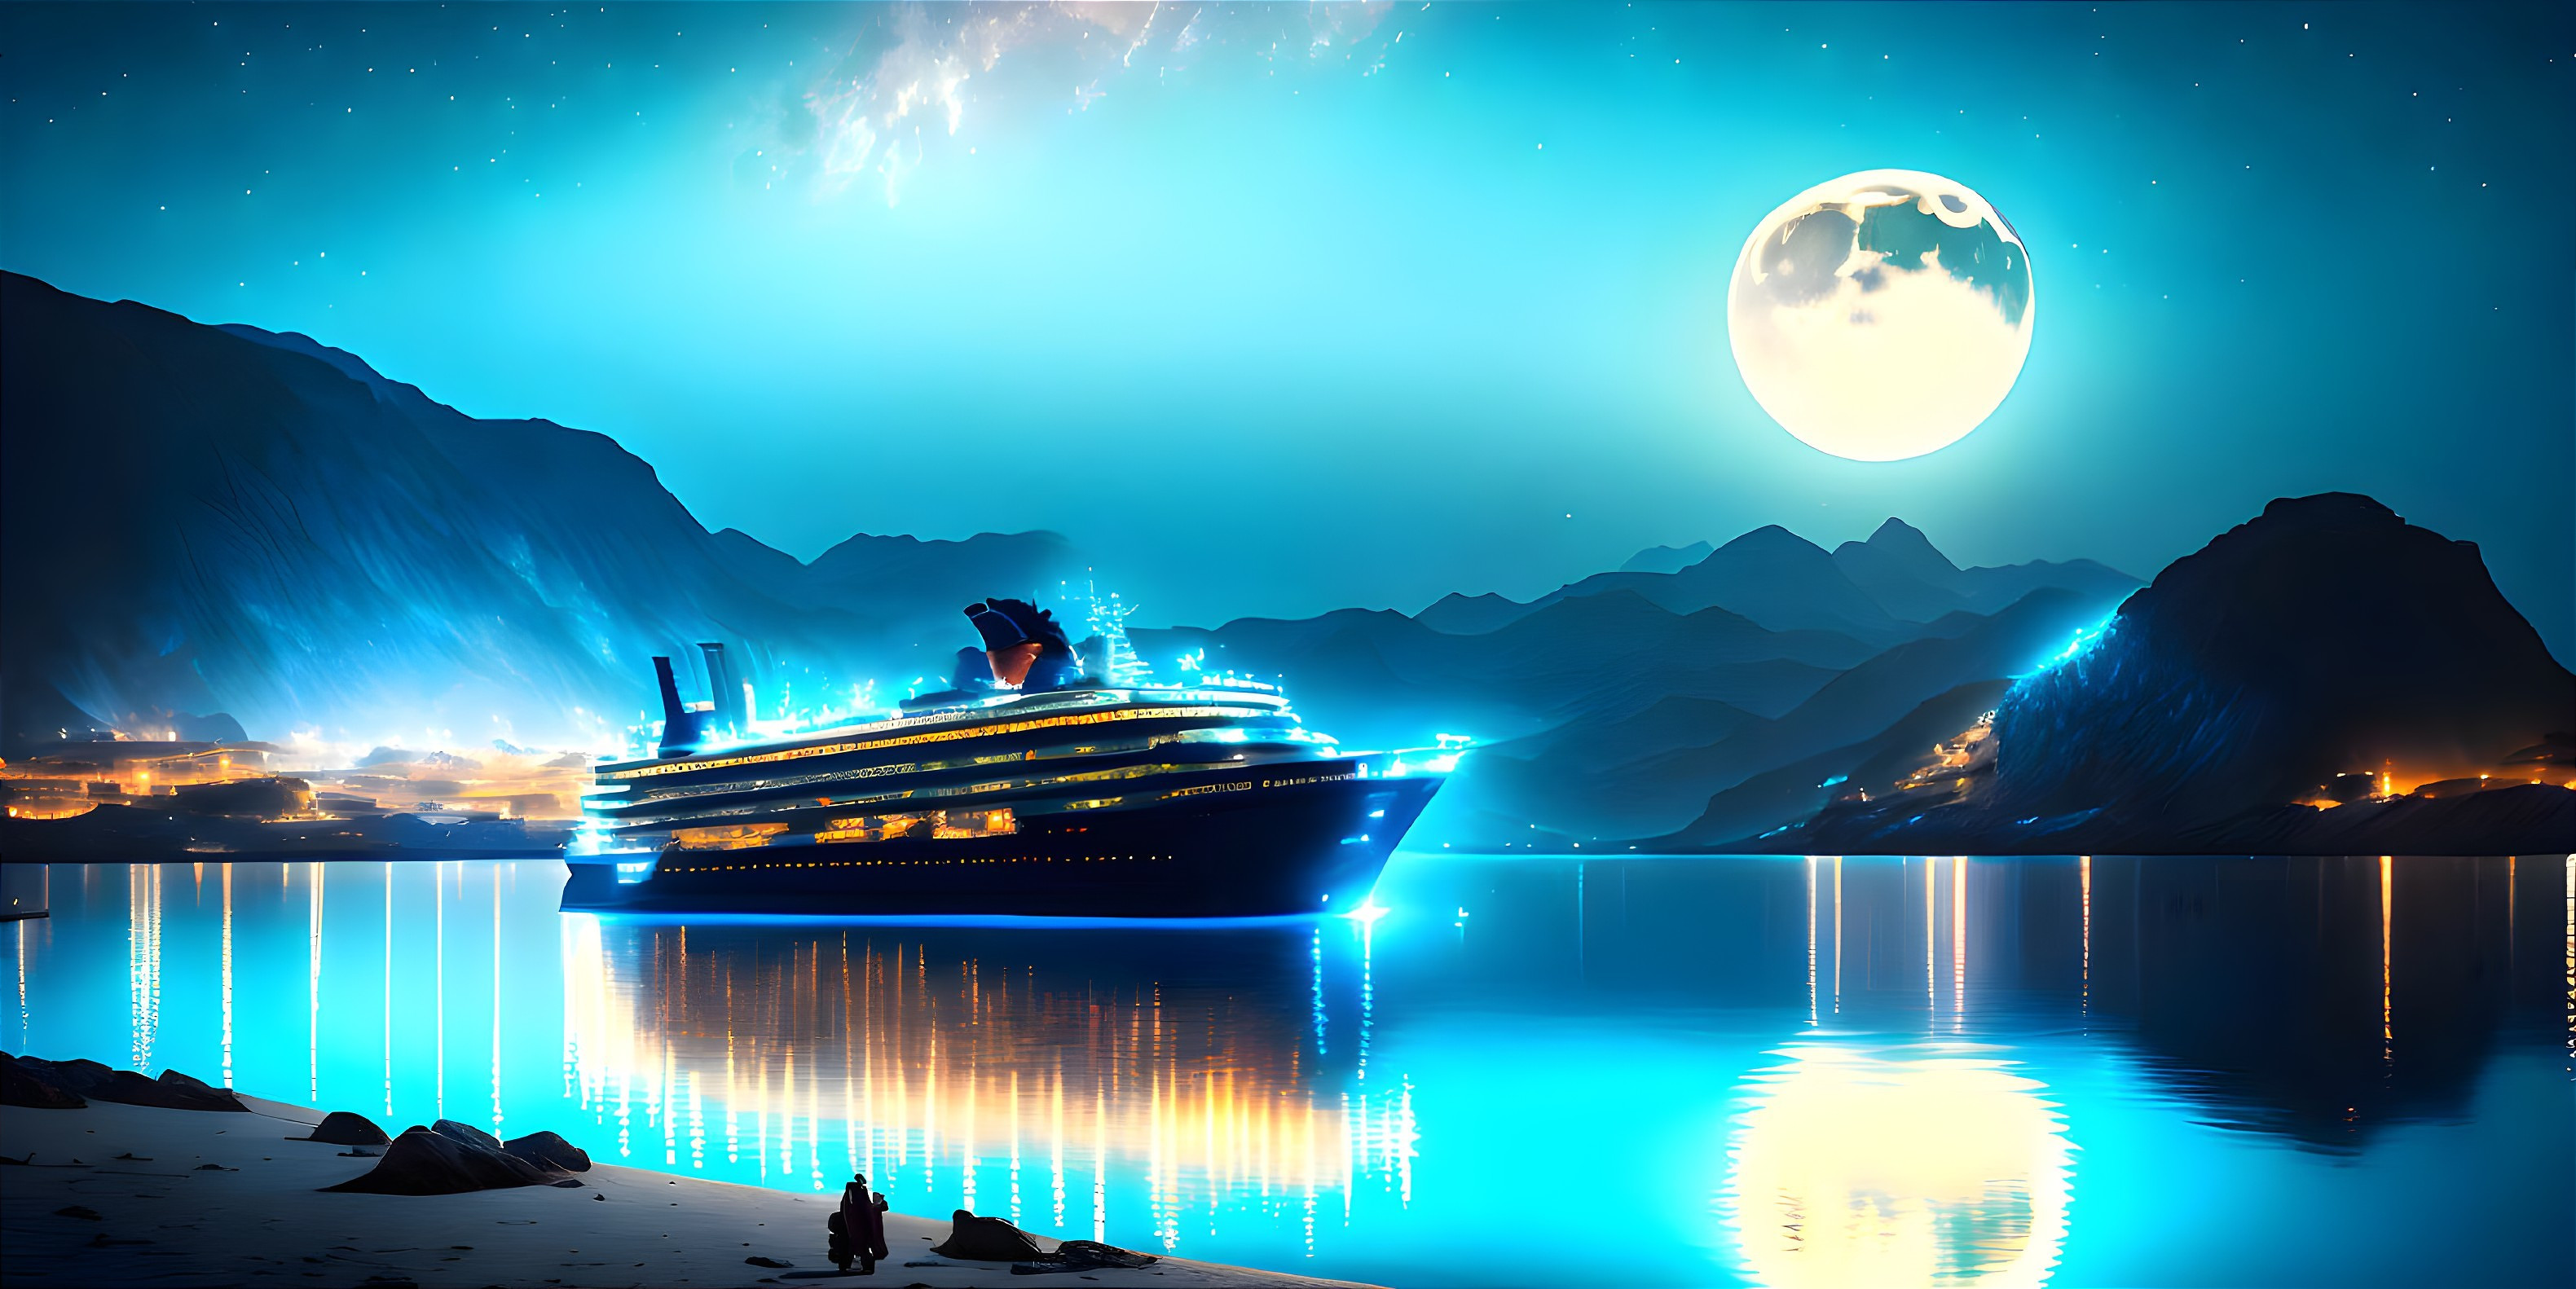 Couple by serene lake at night with illuminated cruise ship, mountains, starry sky, and full